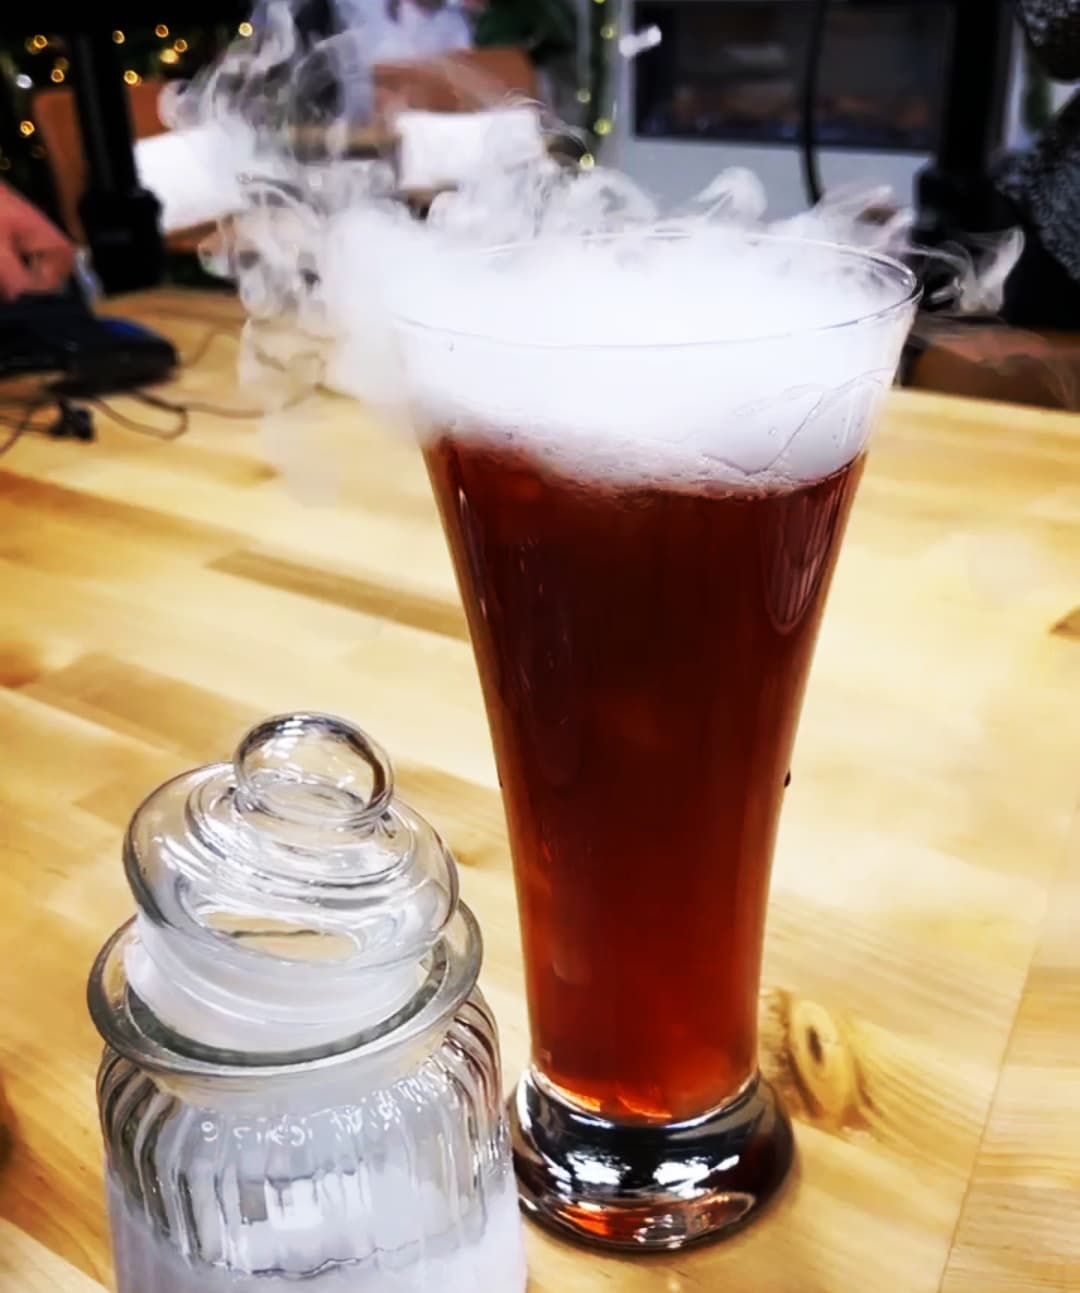 A tall glass of red liquid with steam coming off the top, meant to resemble â€œpolyjuice potionâ€ from the Harry Potter books. On the left is a small glass pot of what appears to be sugar. Photo from The Venue C-Uâ€™s Facebook page.